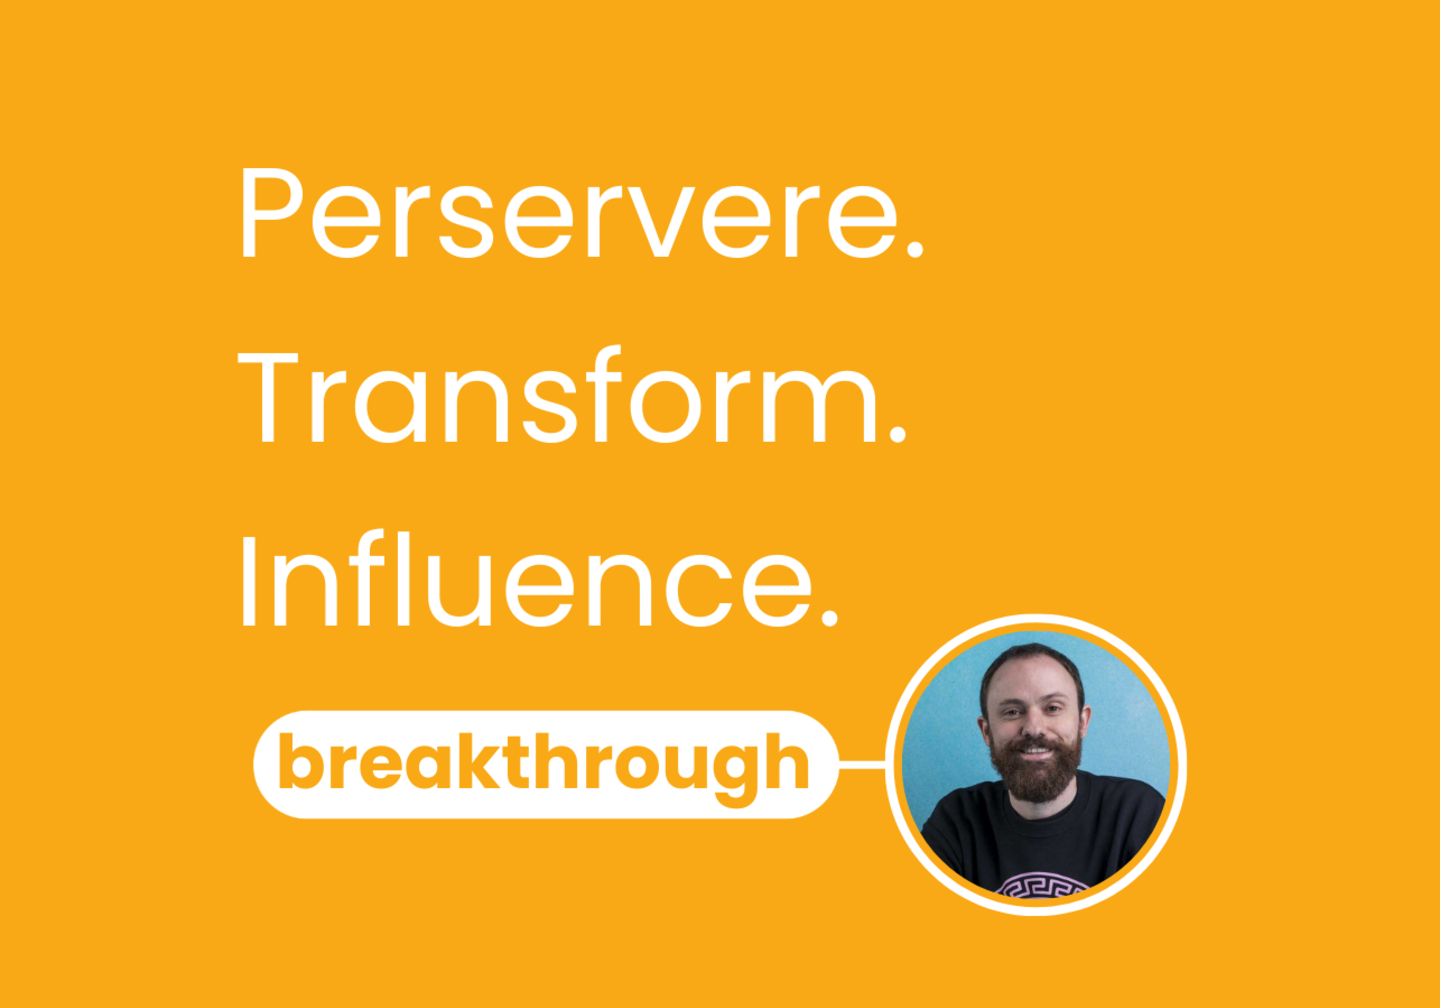 Breakthrough image with Guy Walding - text on image Perservere, Transform, Influence